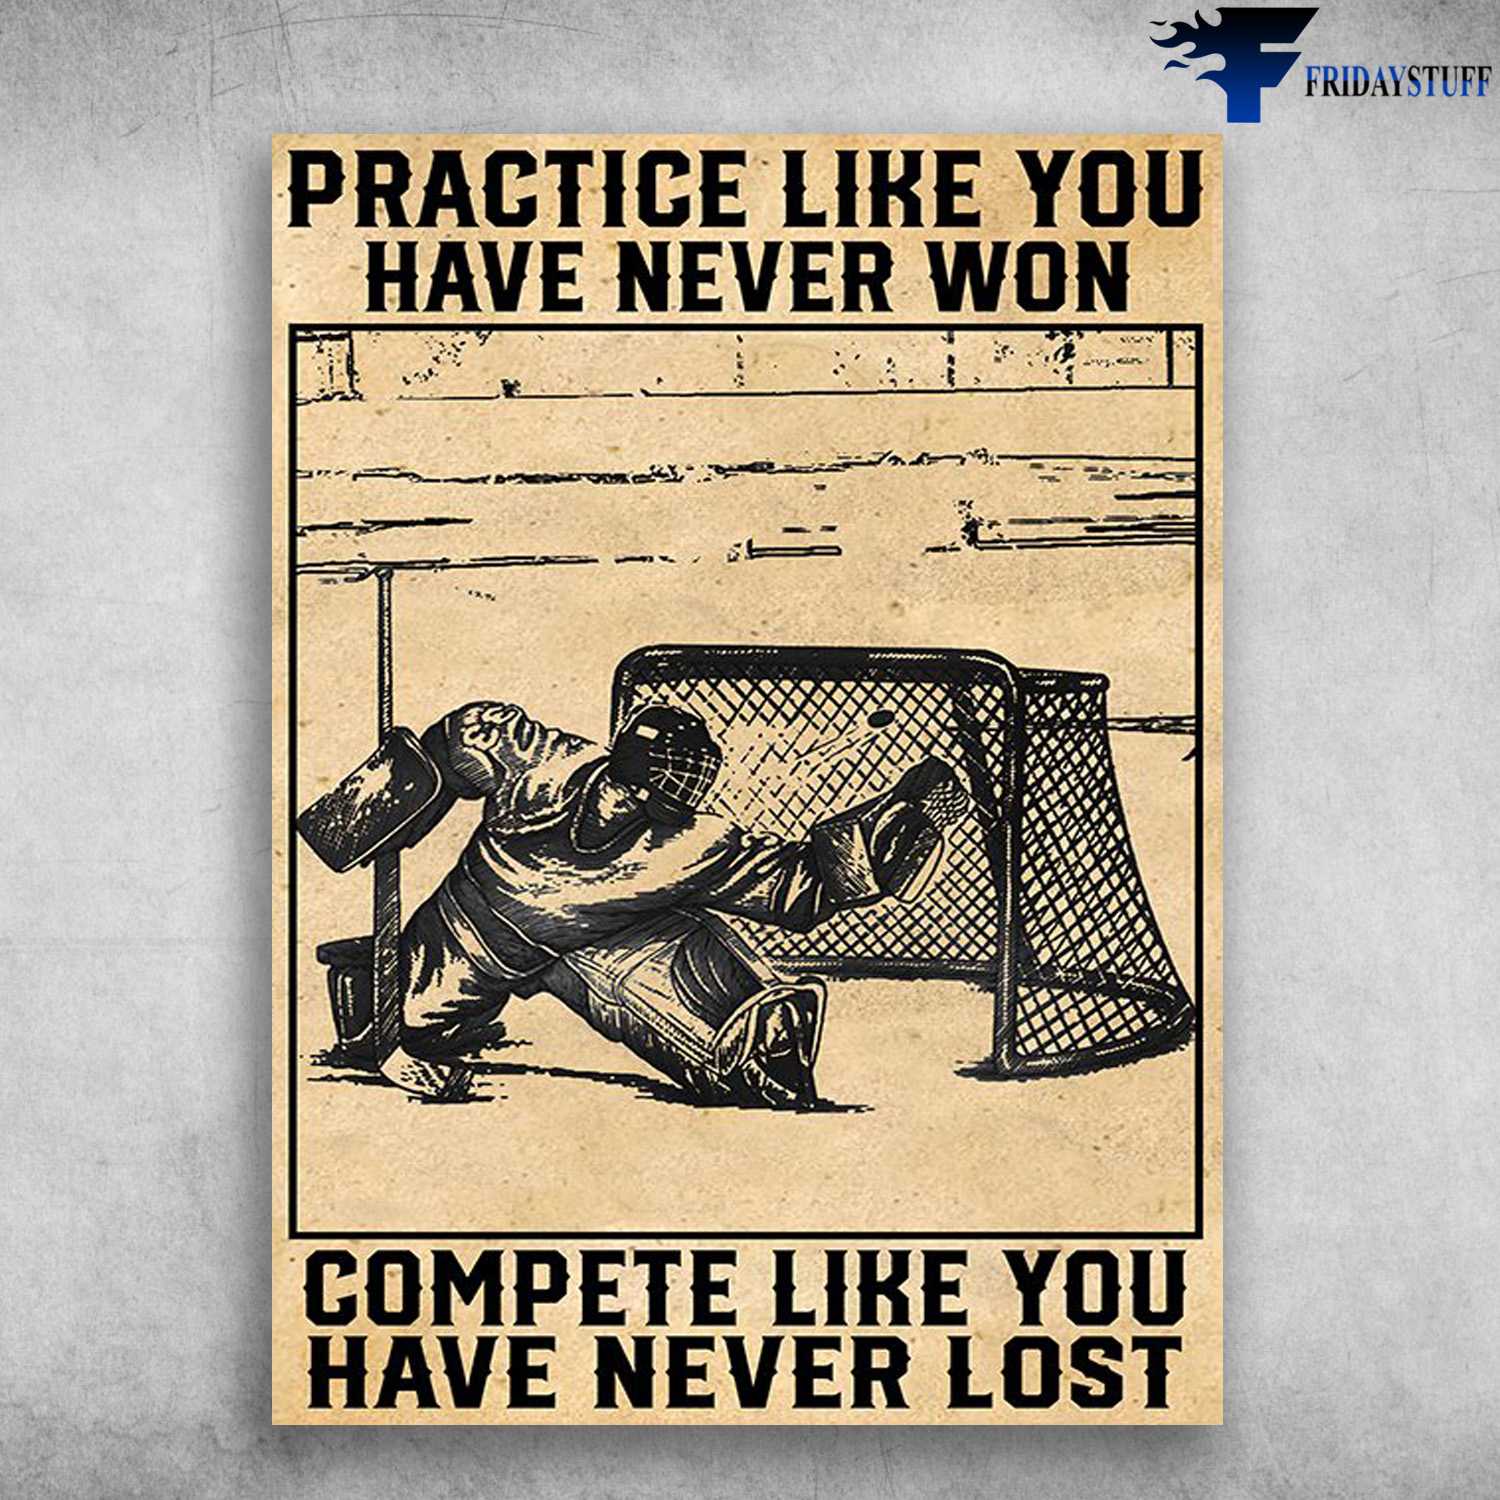 Ice Hockey, Hockey Poster, Practice Like You Never Won, Complete Like You Have Never Lost